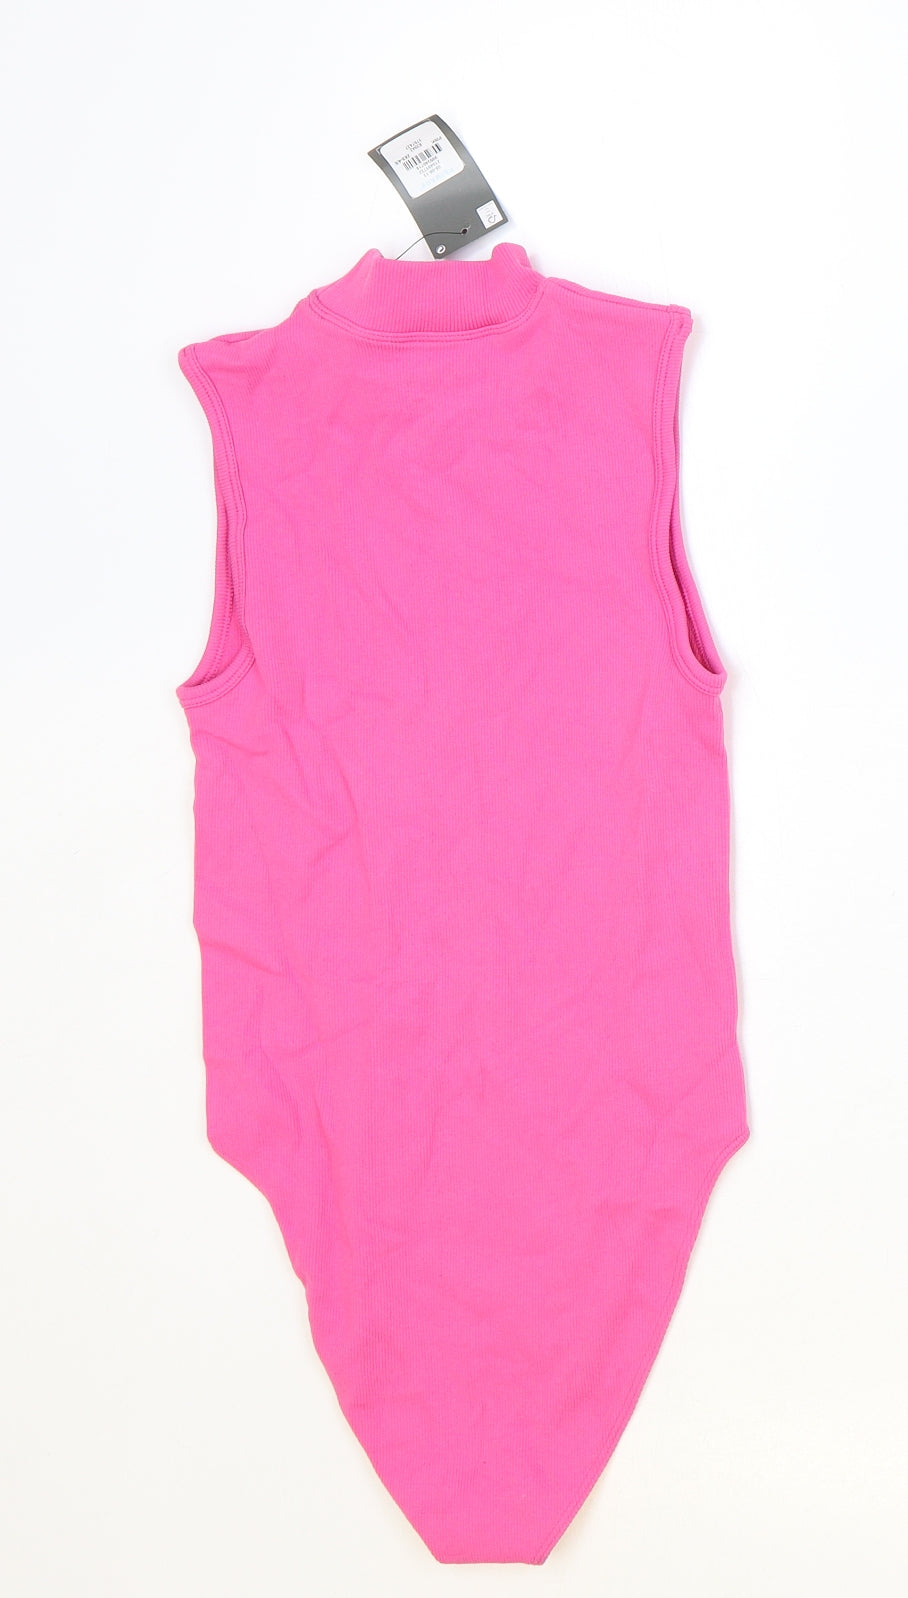 Primark Womens Pink Polyester Bodysuit One-Piece Size 2XS Snap